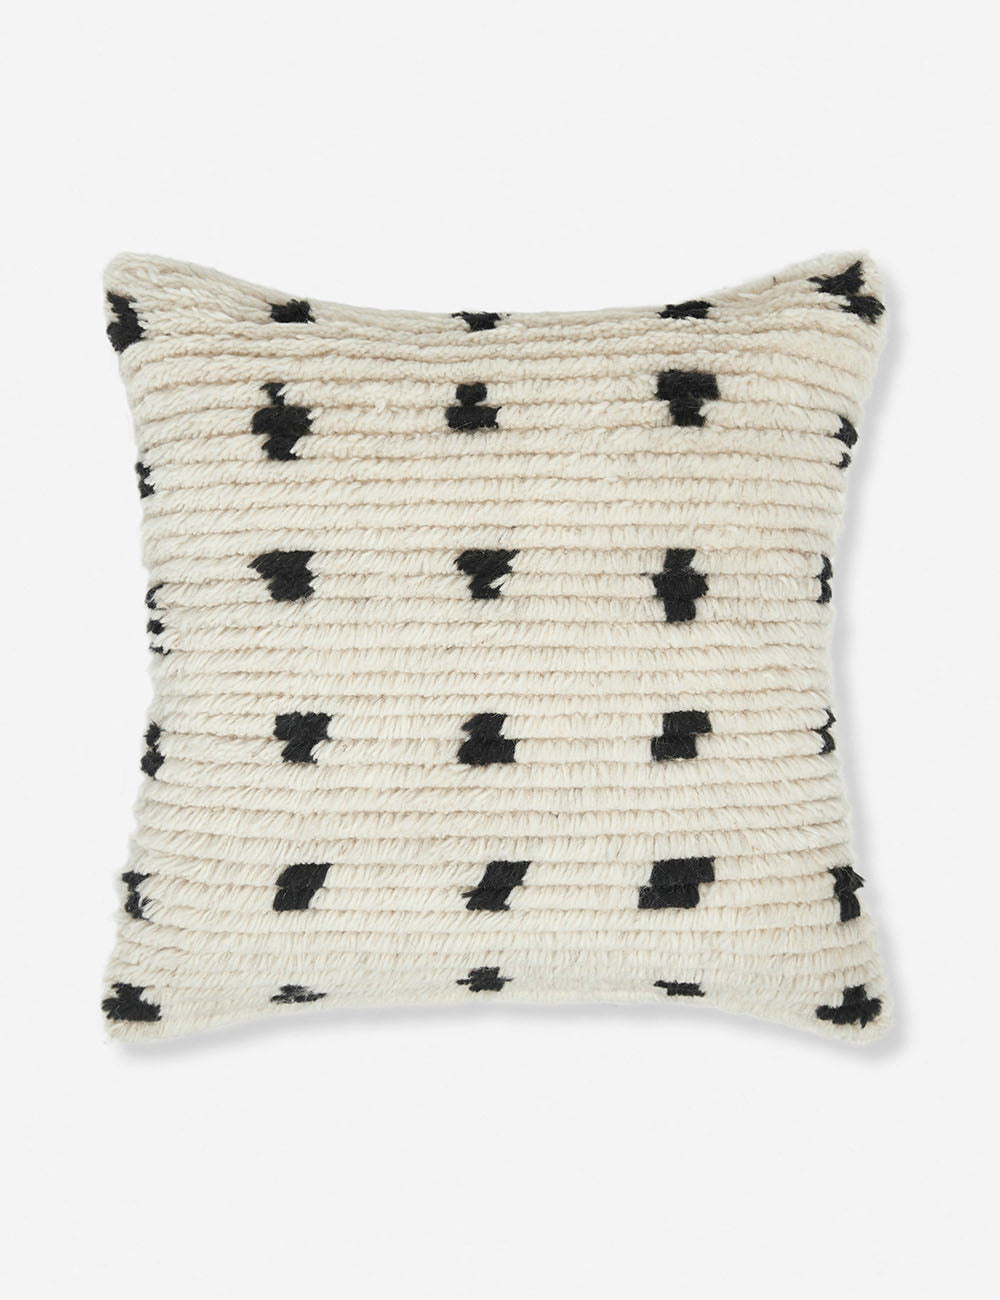 Hip to be Square Pillow {Pollinate by AGF} - Samelia's Mum